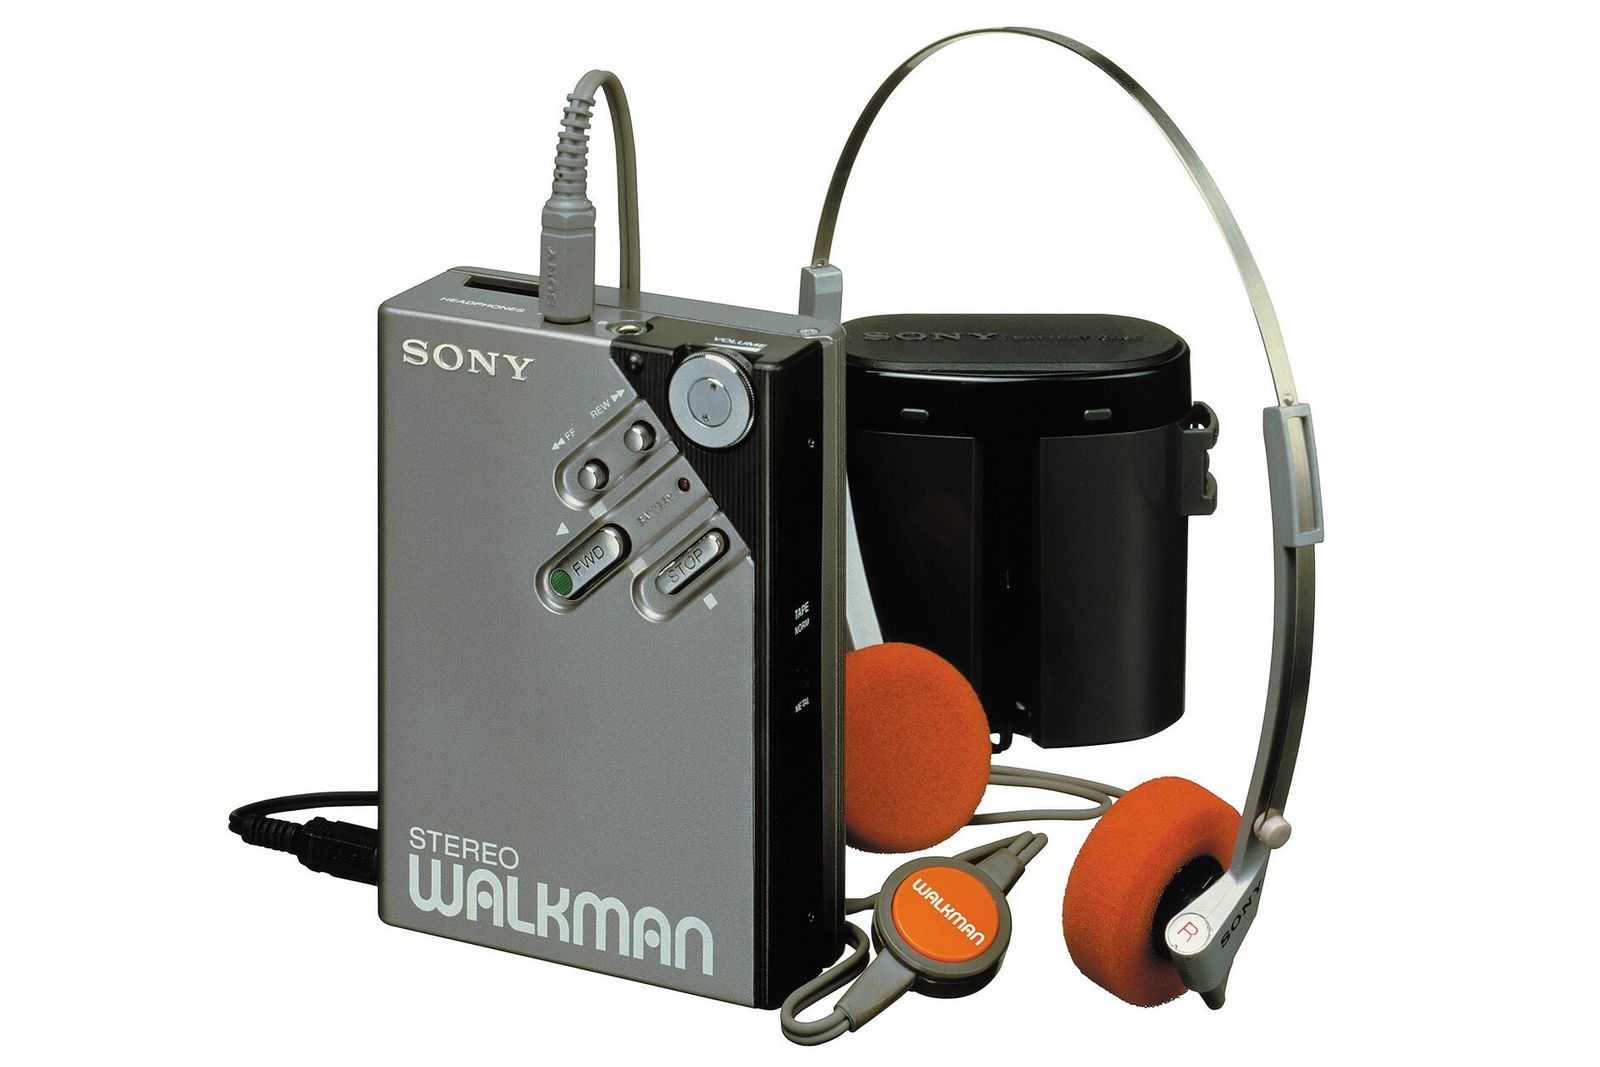 15 Iconic Sony Walkman Designs From Yesteryear Looking Back At Classic Devices image 1